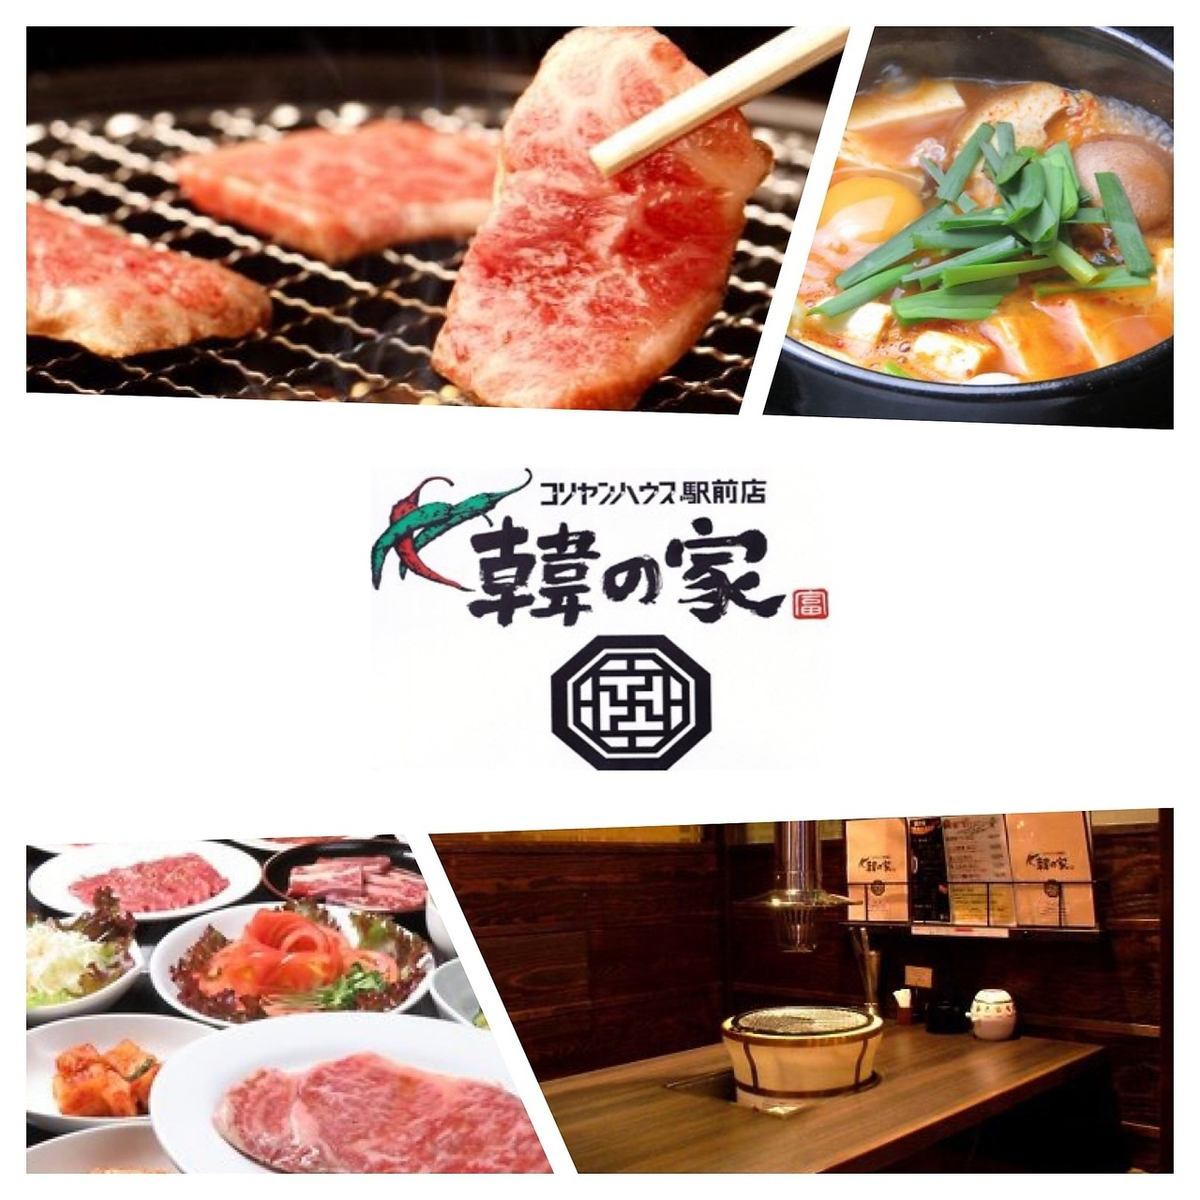 Private rooms are available for private use! A restaurant where you can enjoy yakiniku and Korean cuisine. All-you-can-drink courses start at 4,800 yen!!